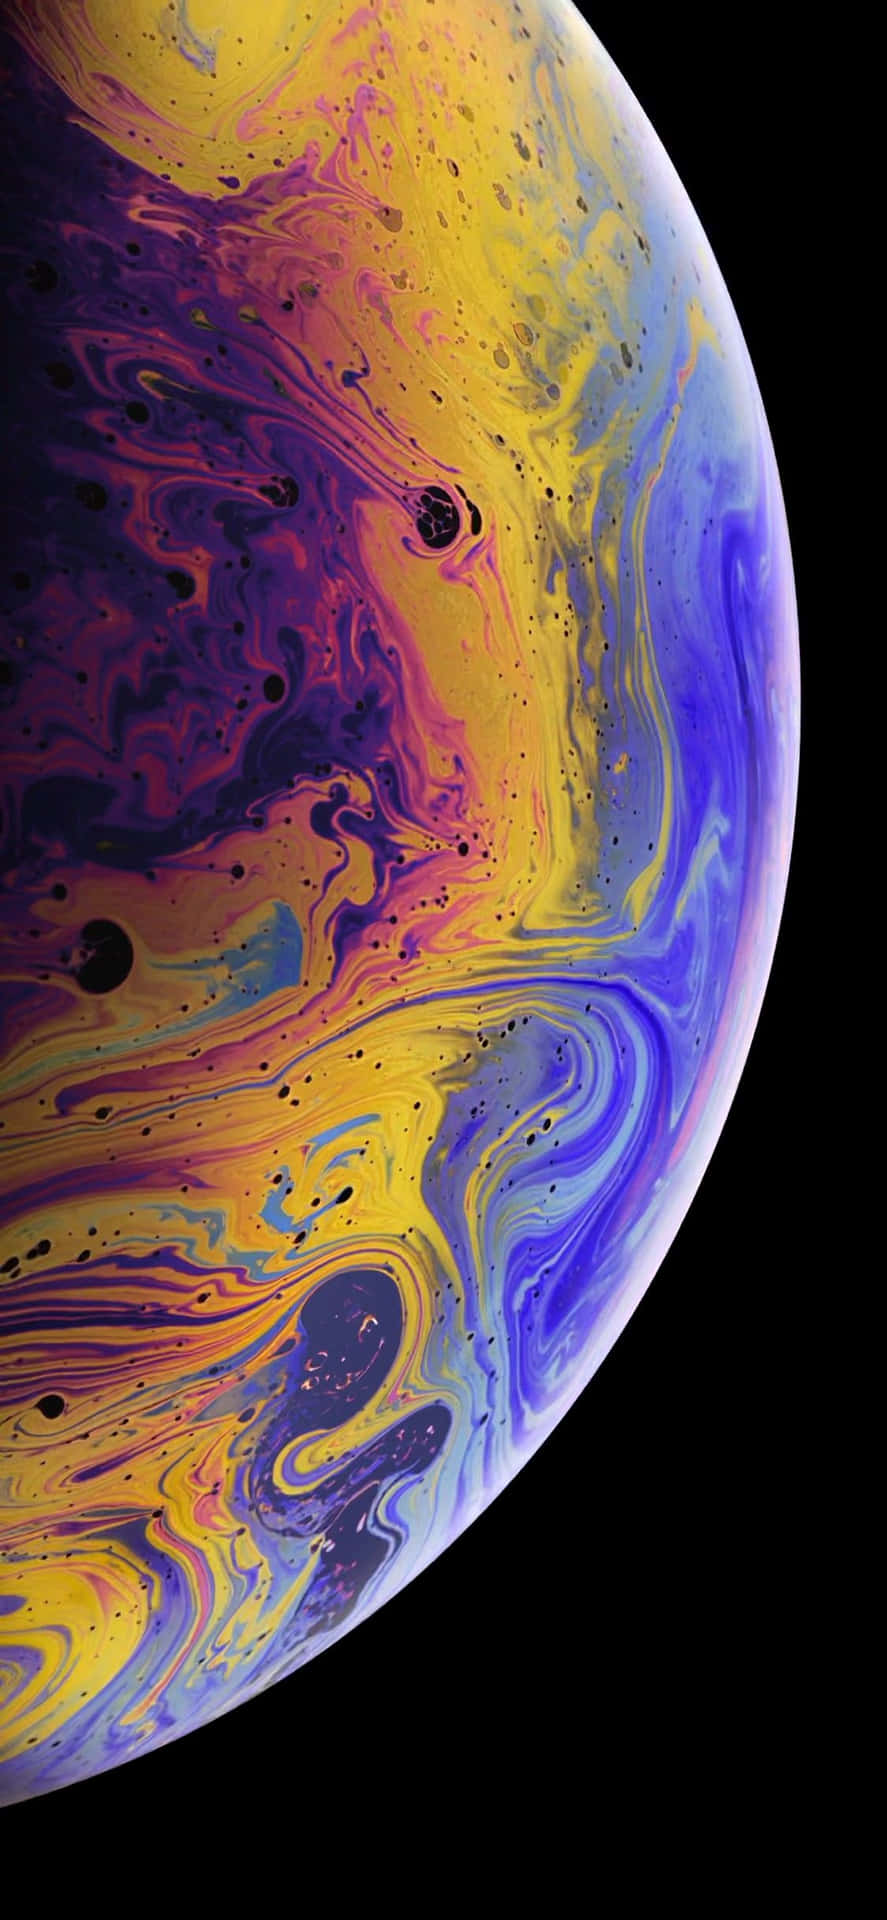 Make the World Your Oyster with the 2020 IPhone Wallpaper